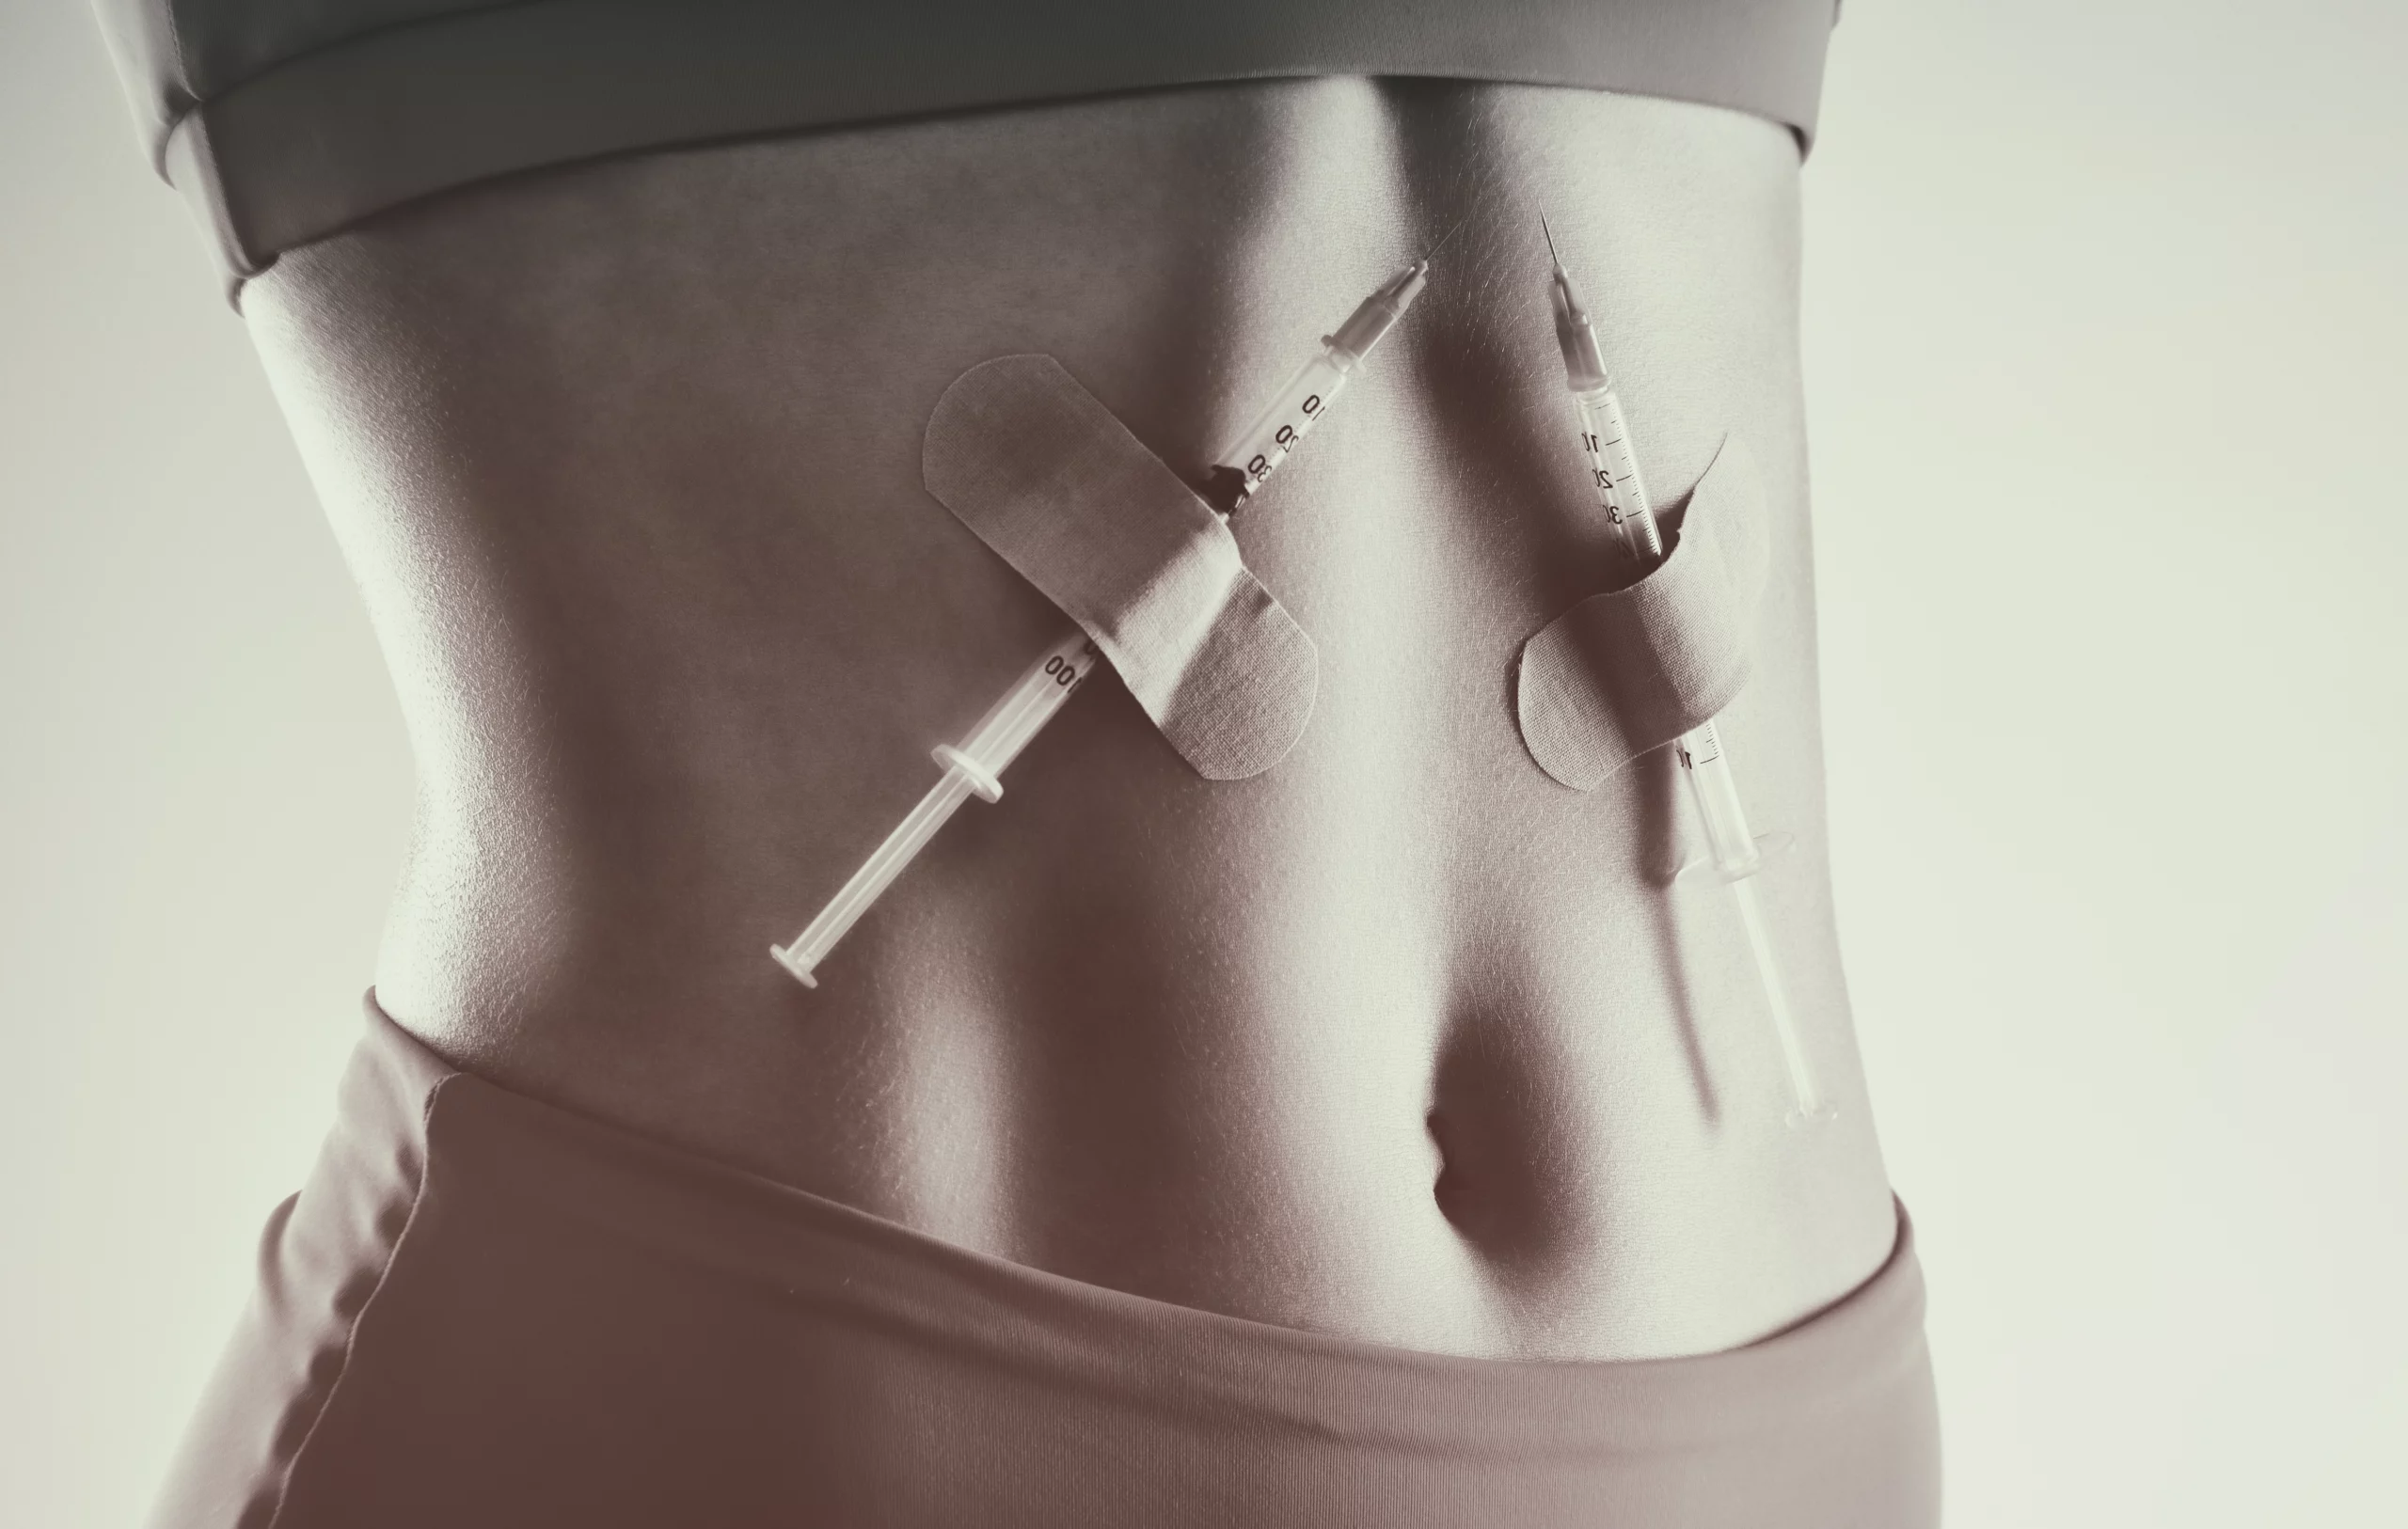 woman with syringes taped to her stomach